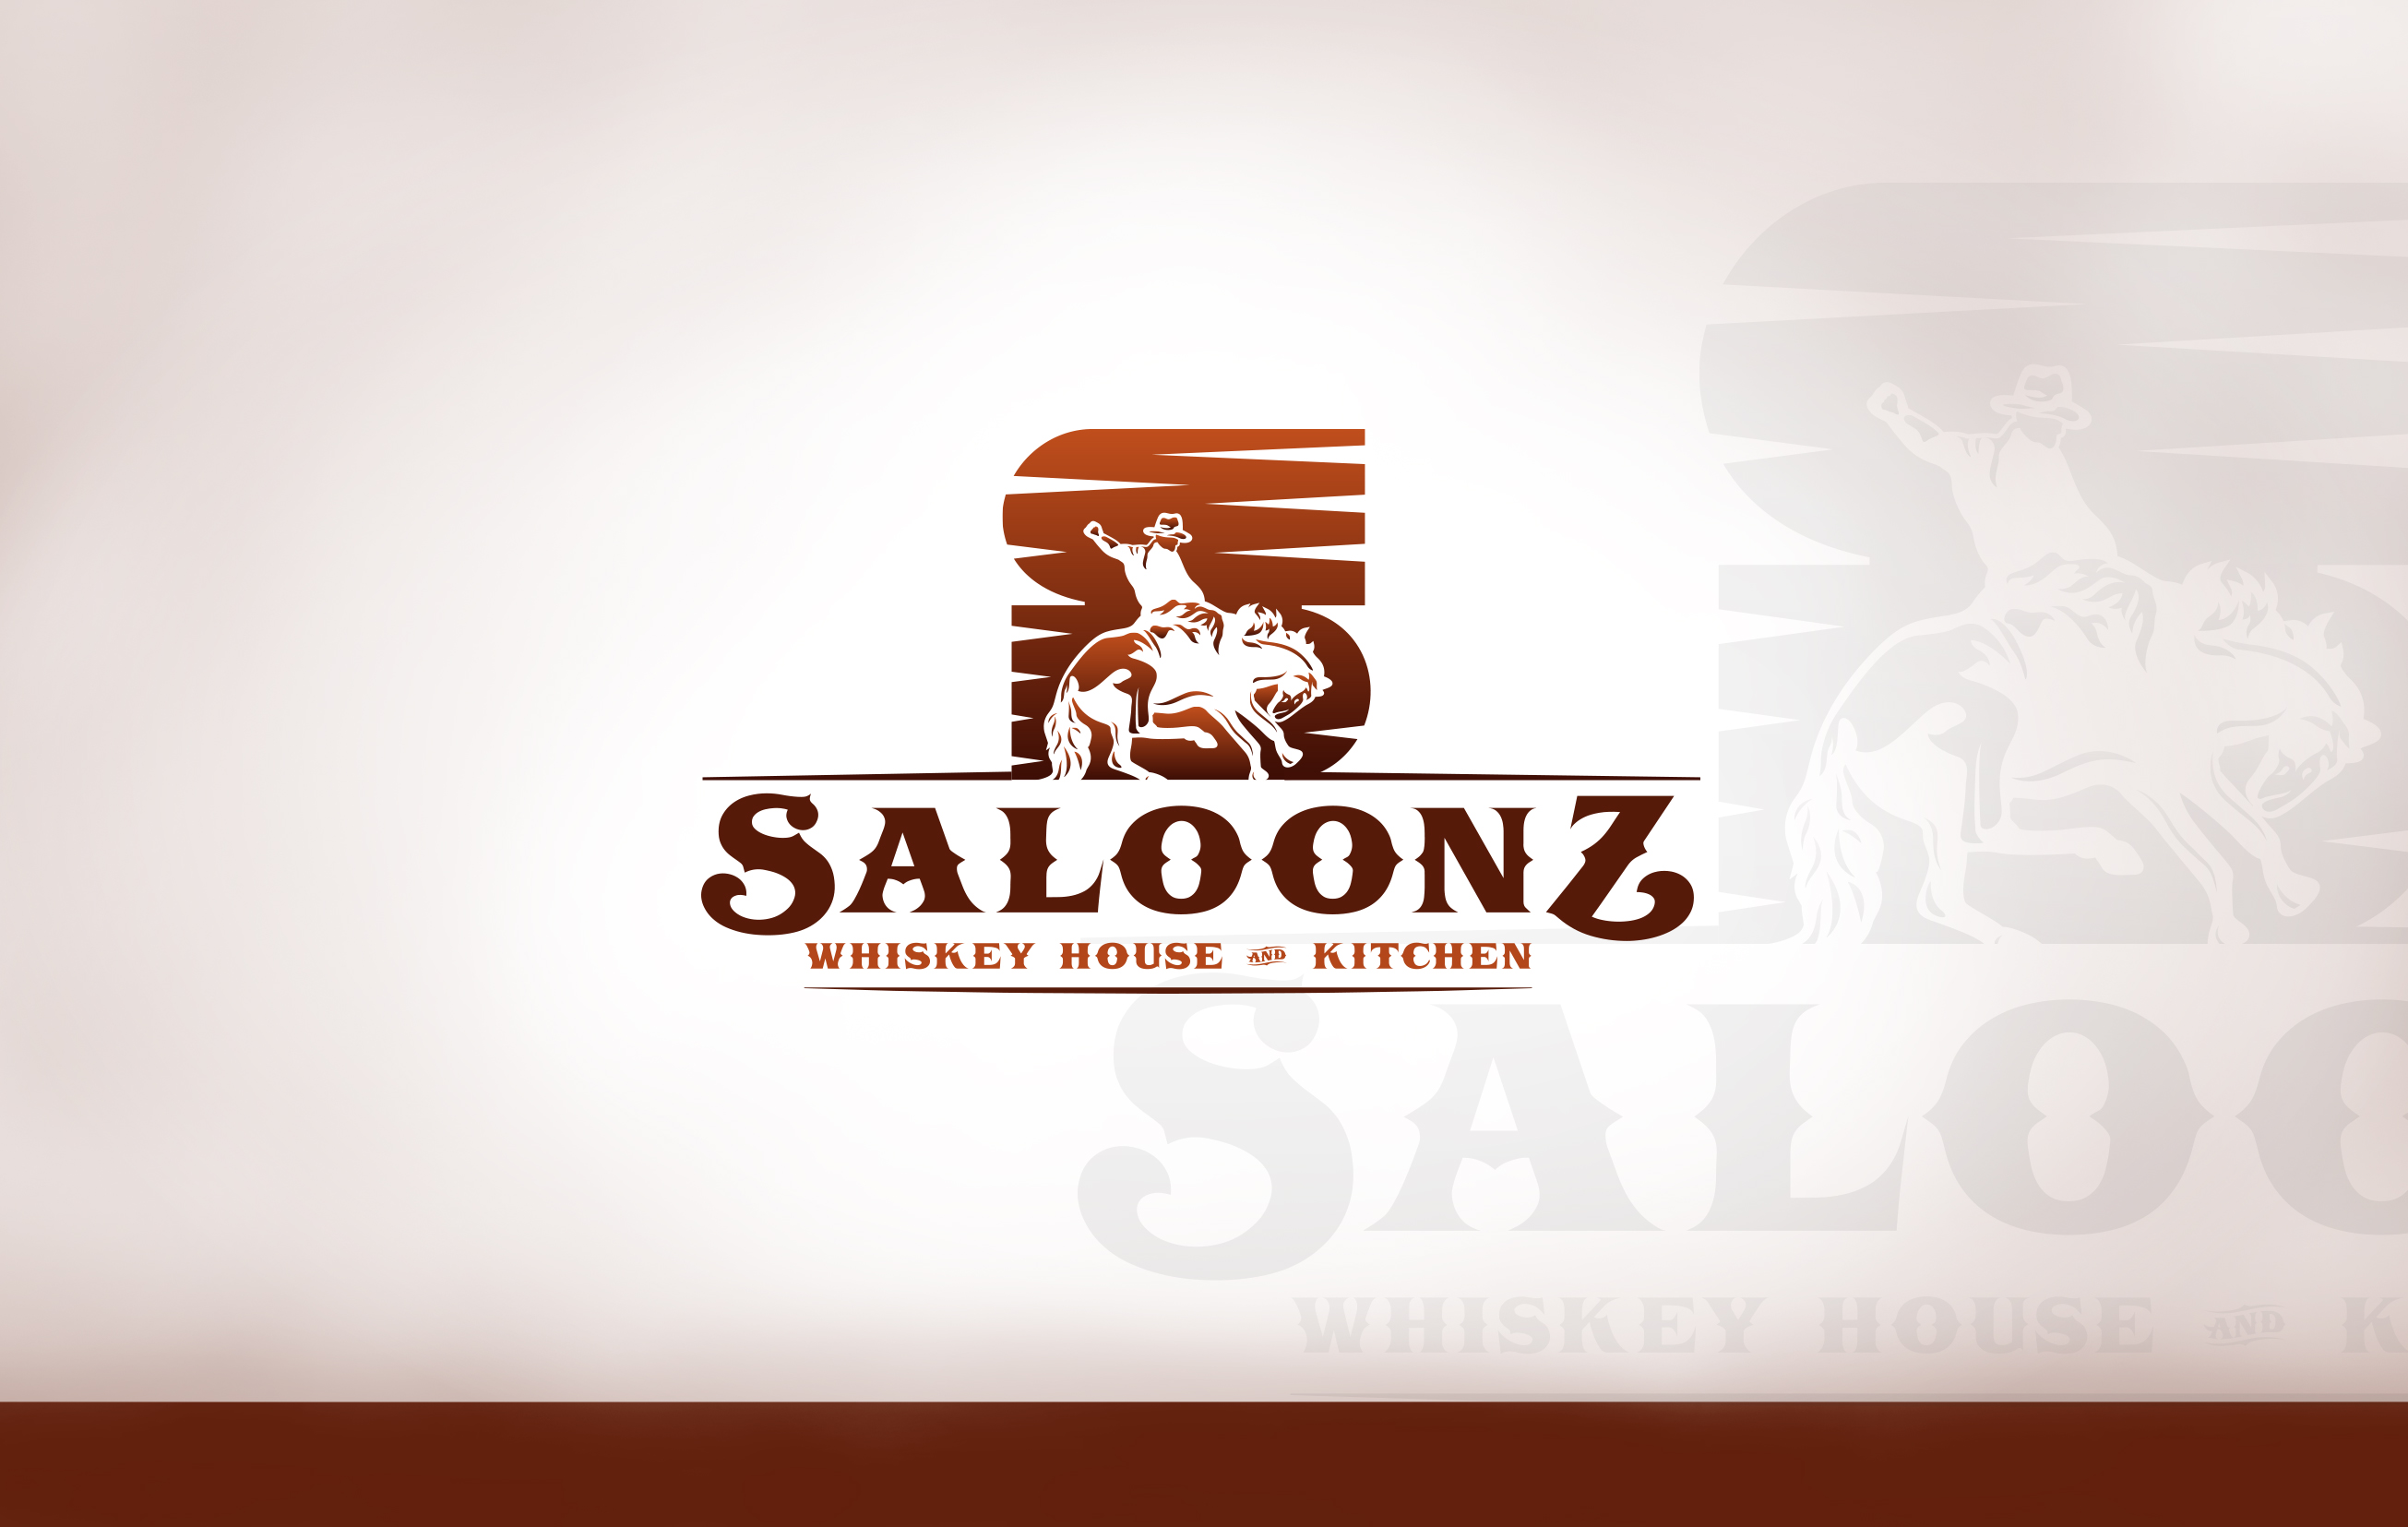 Saloonz Whiskey House and Kitchen Design #4